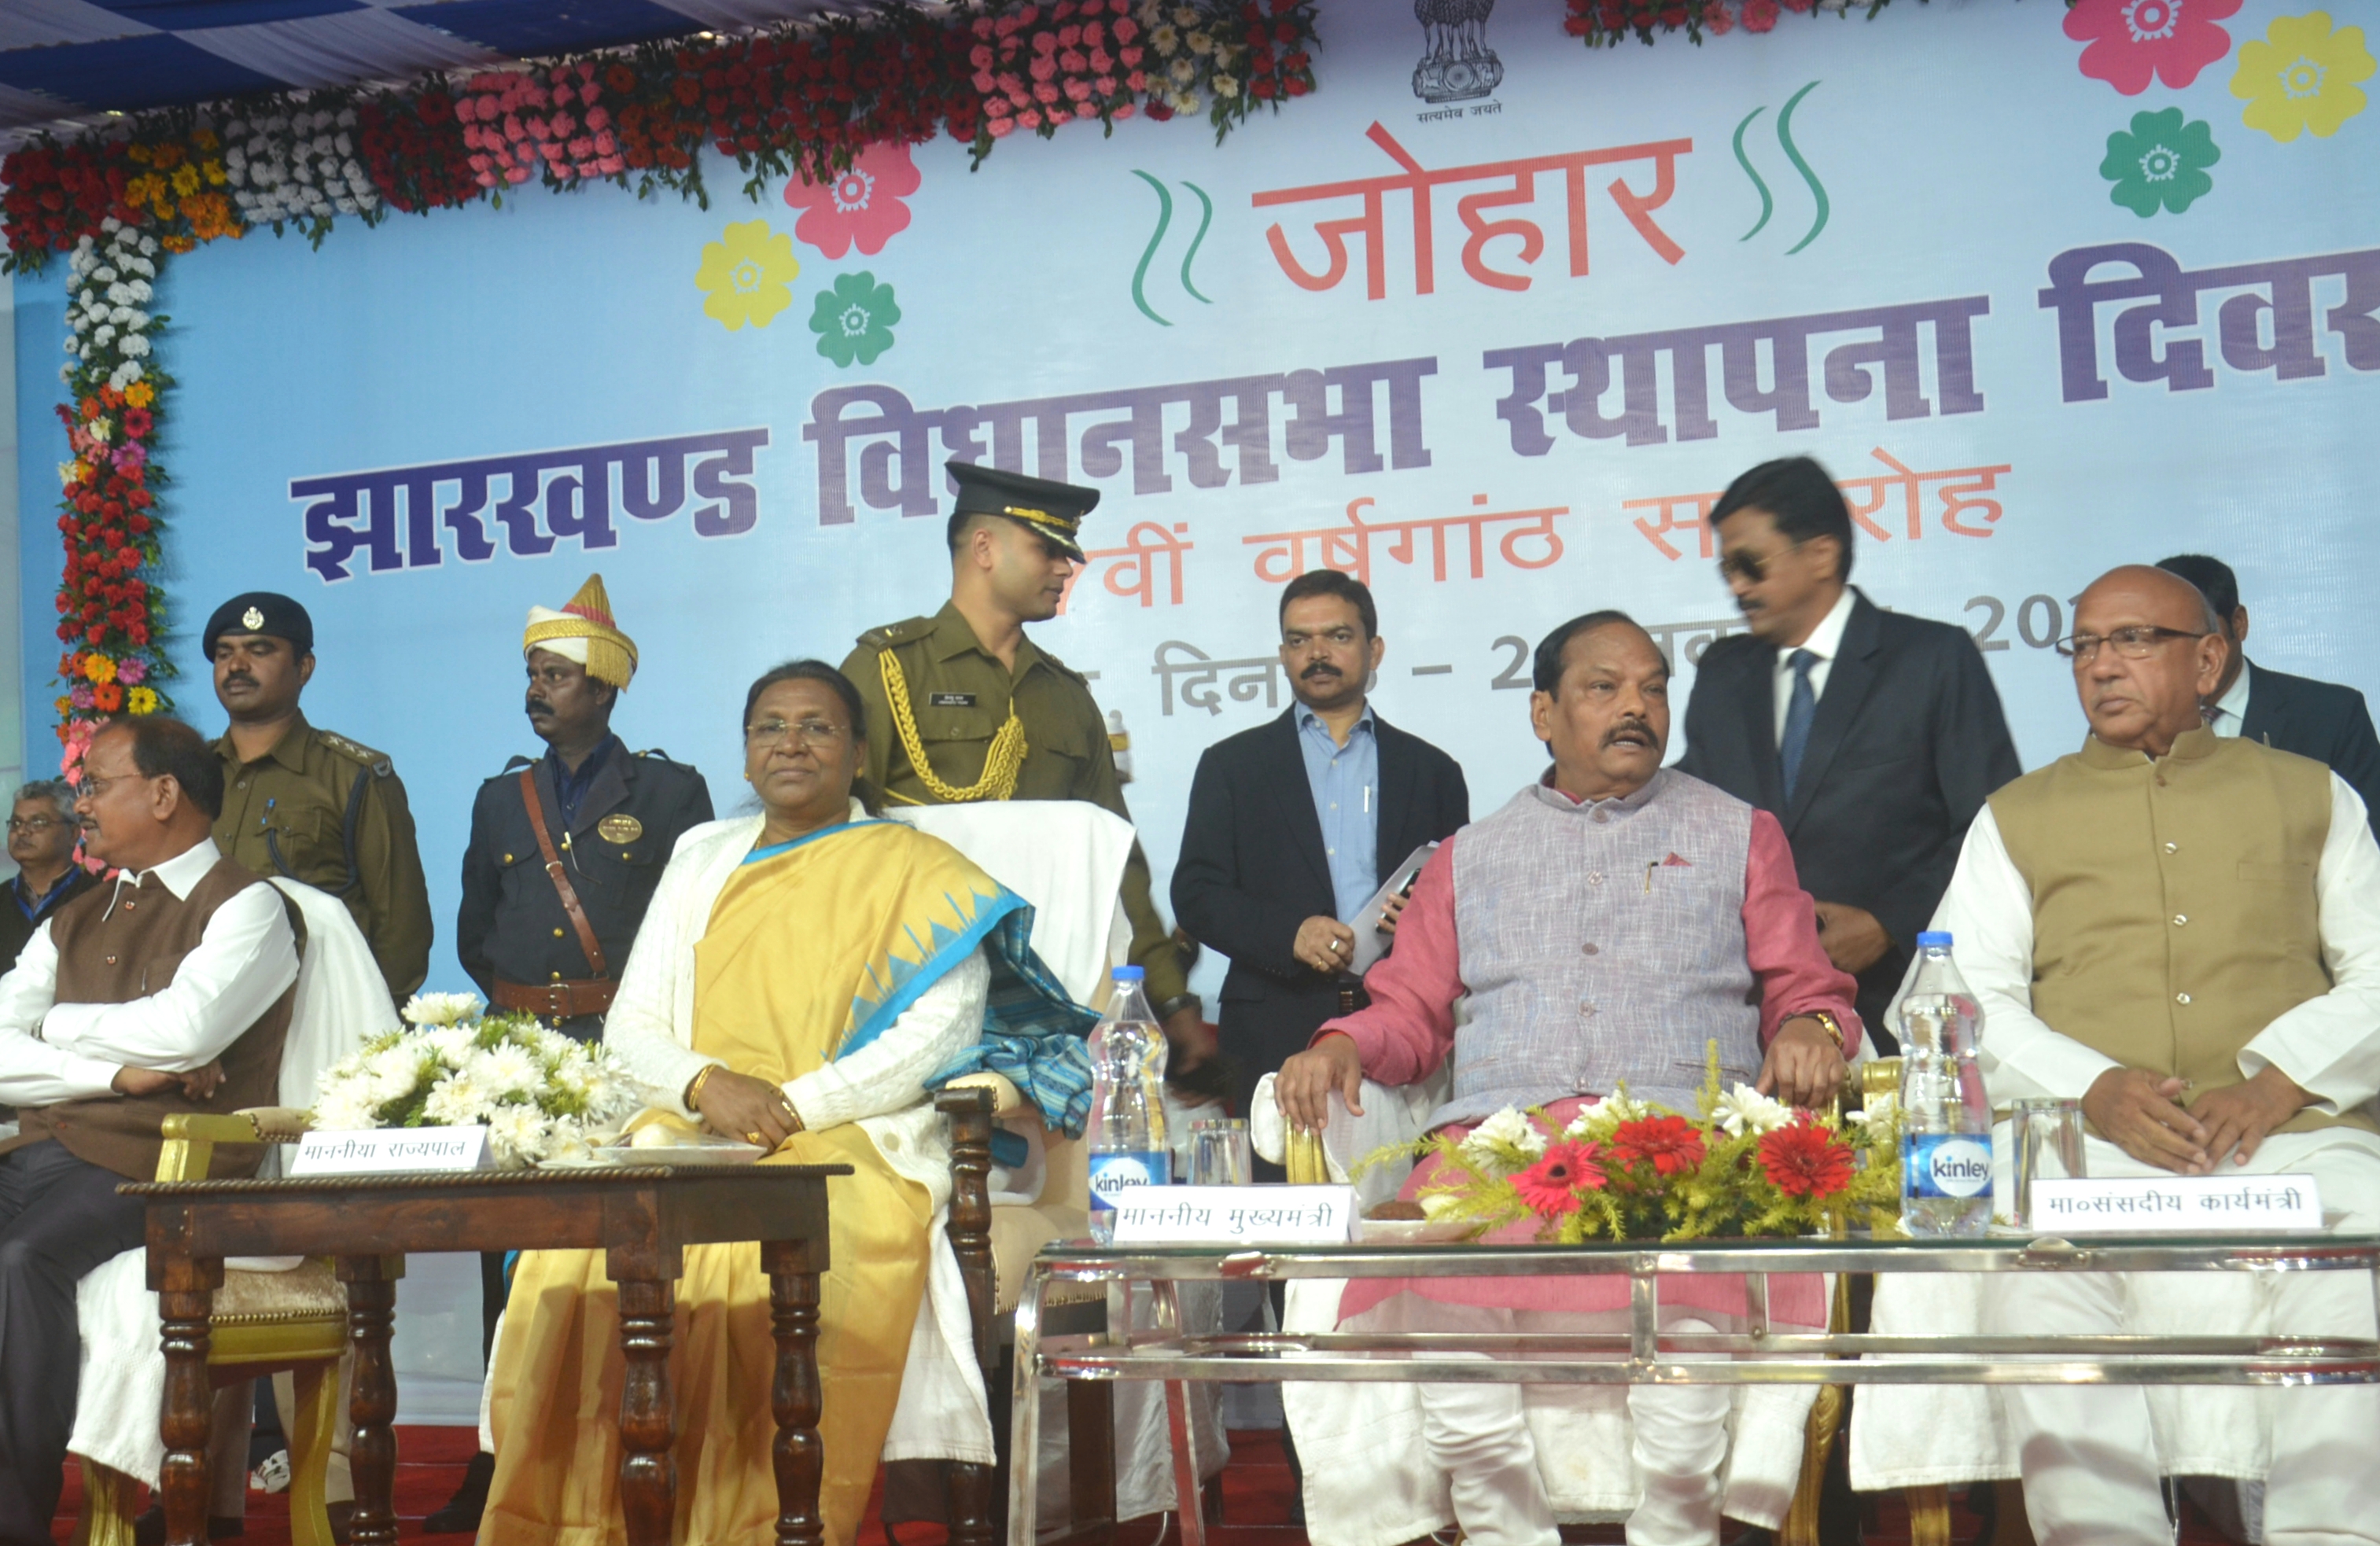 The 17th foundation day of Jharkhand vidhan sabha